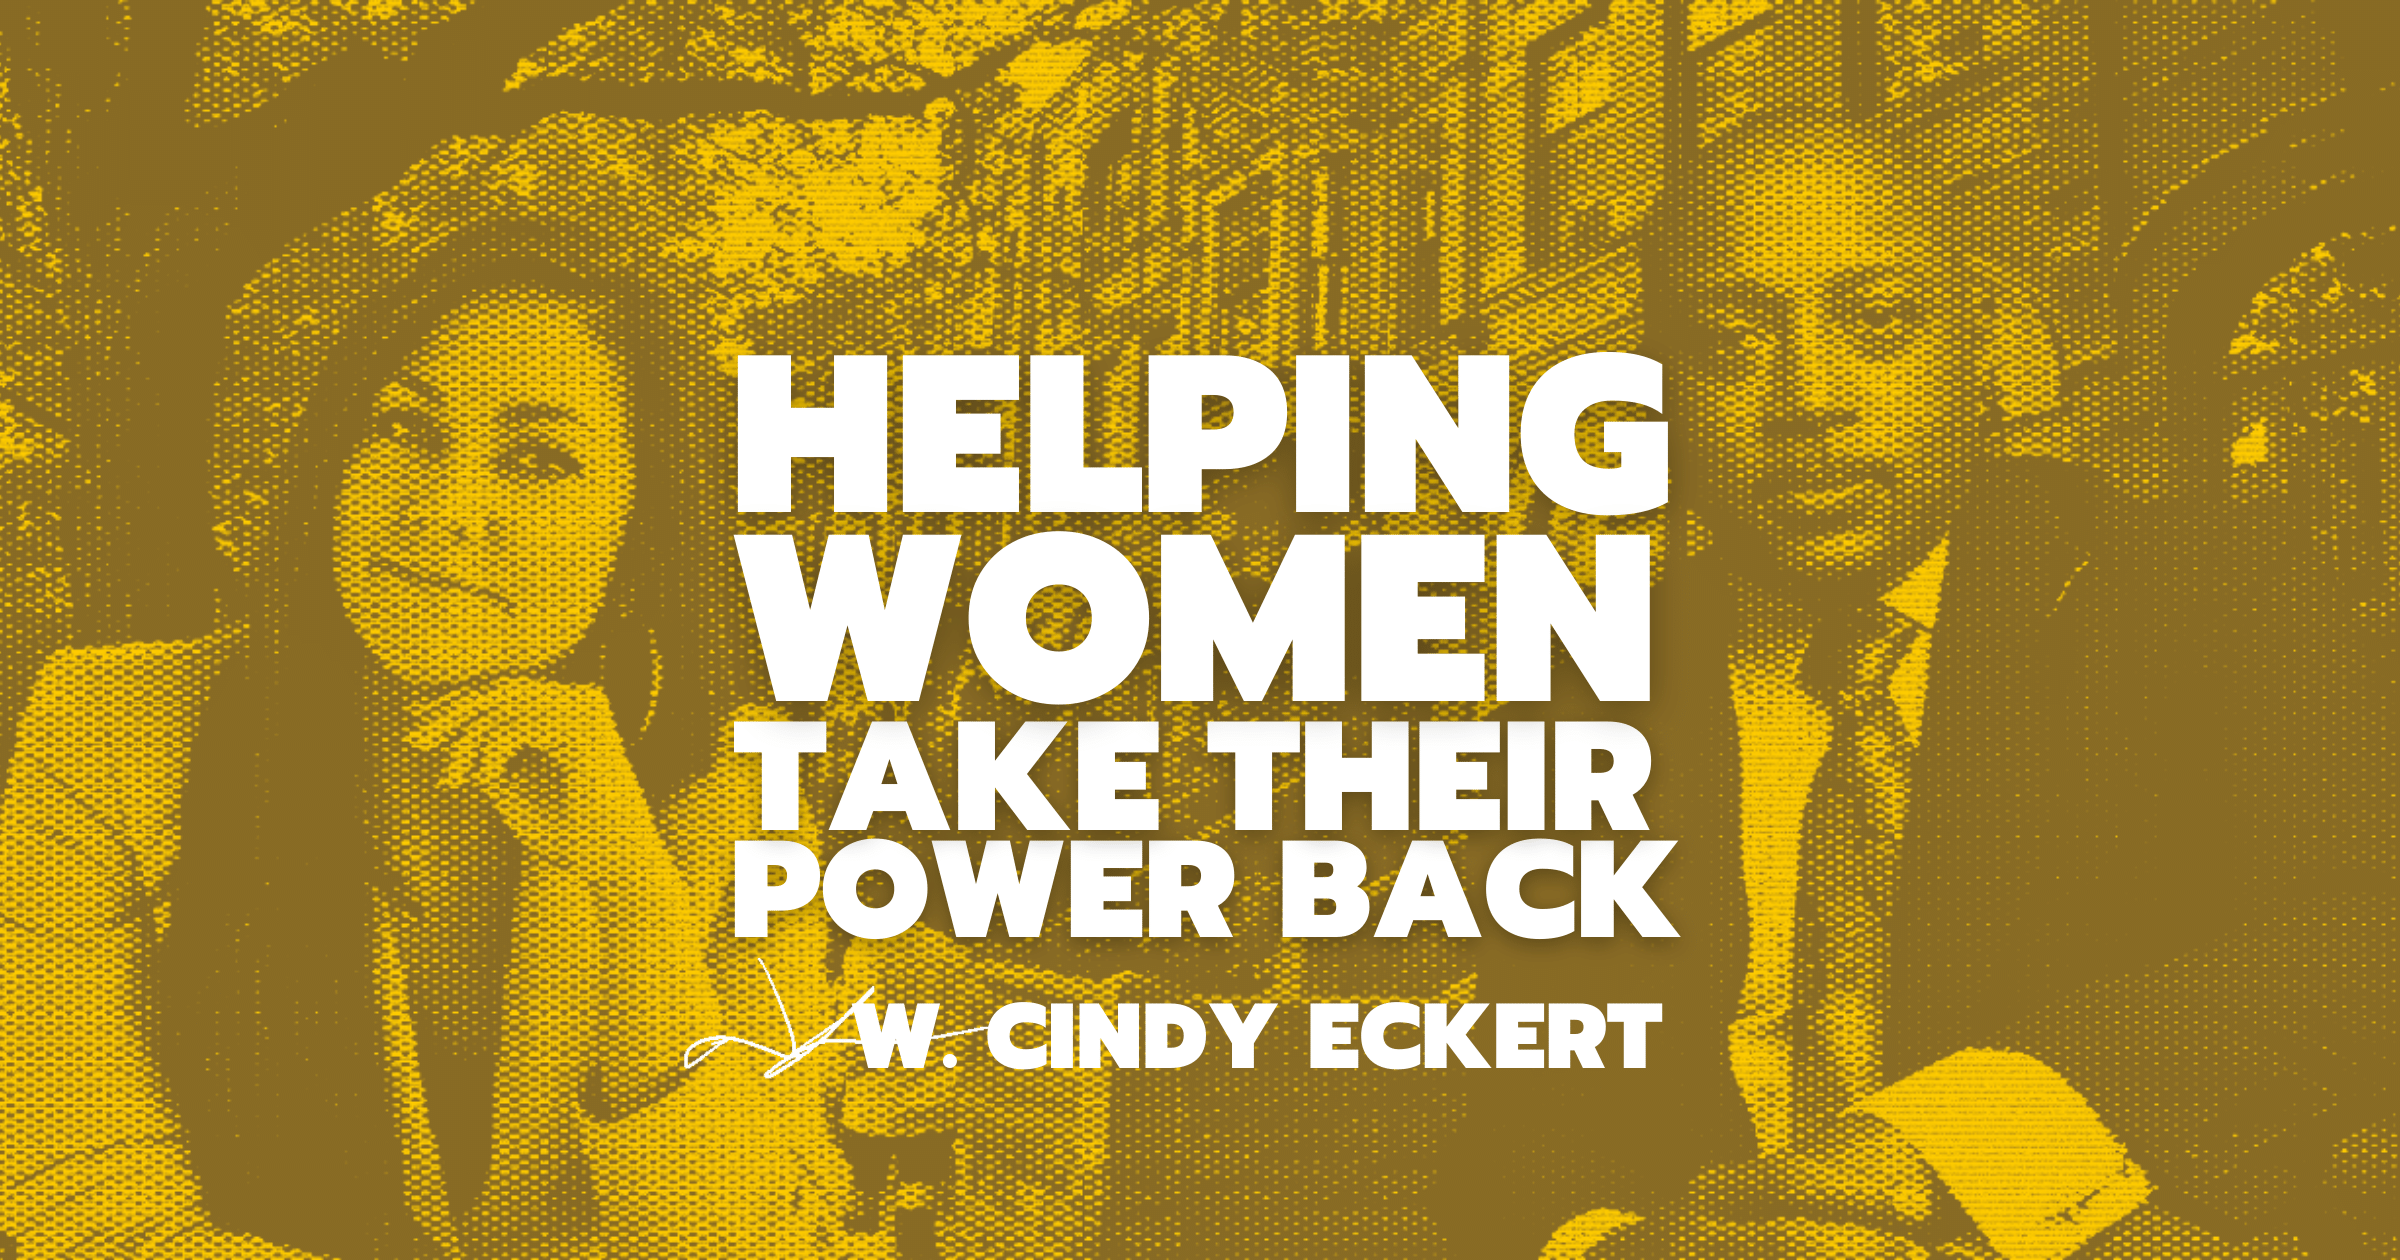 Daymond John and Cindy Eckert with "Helping Women Take Their Powers Back" superimposed over.